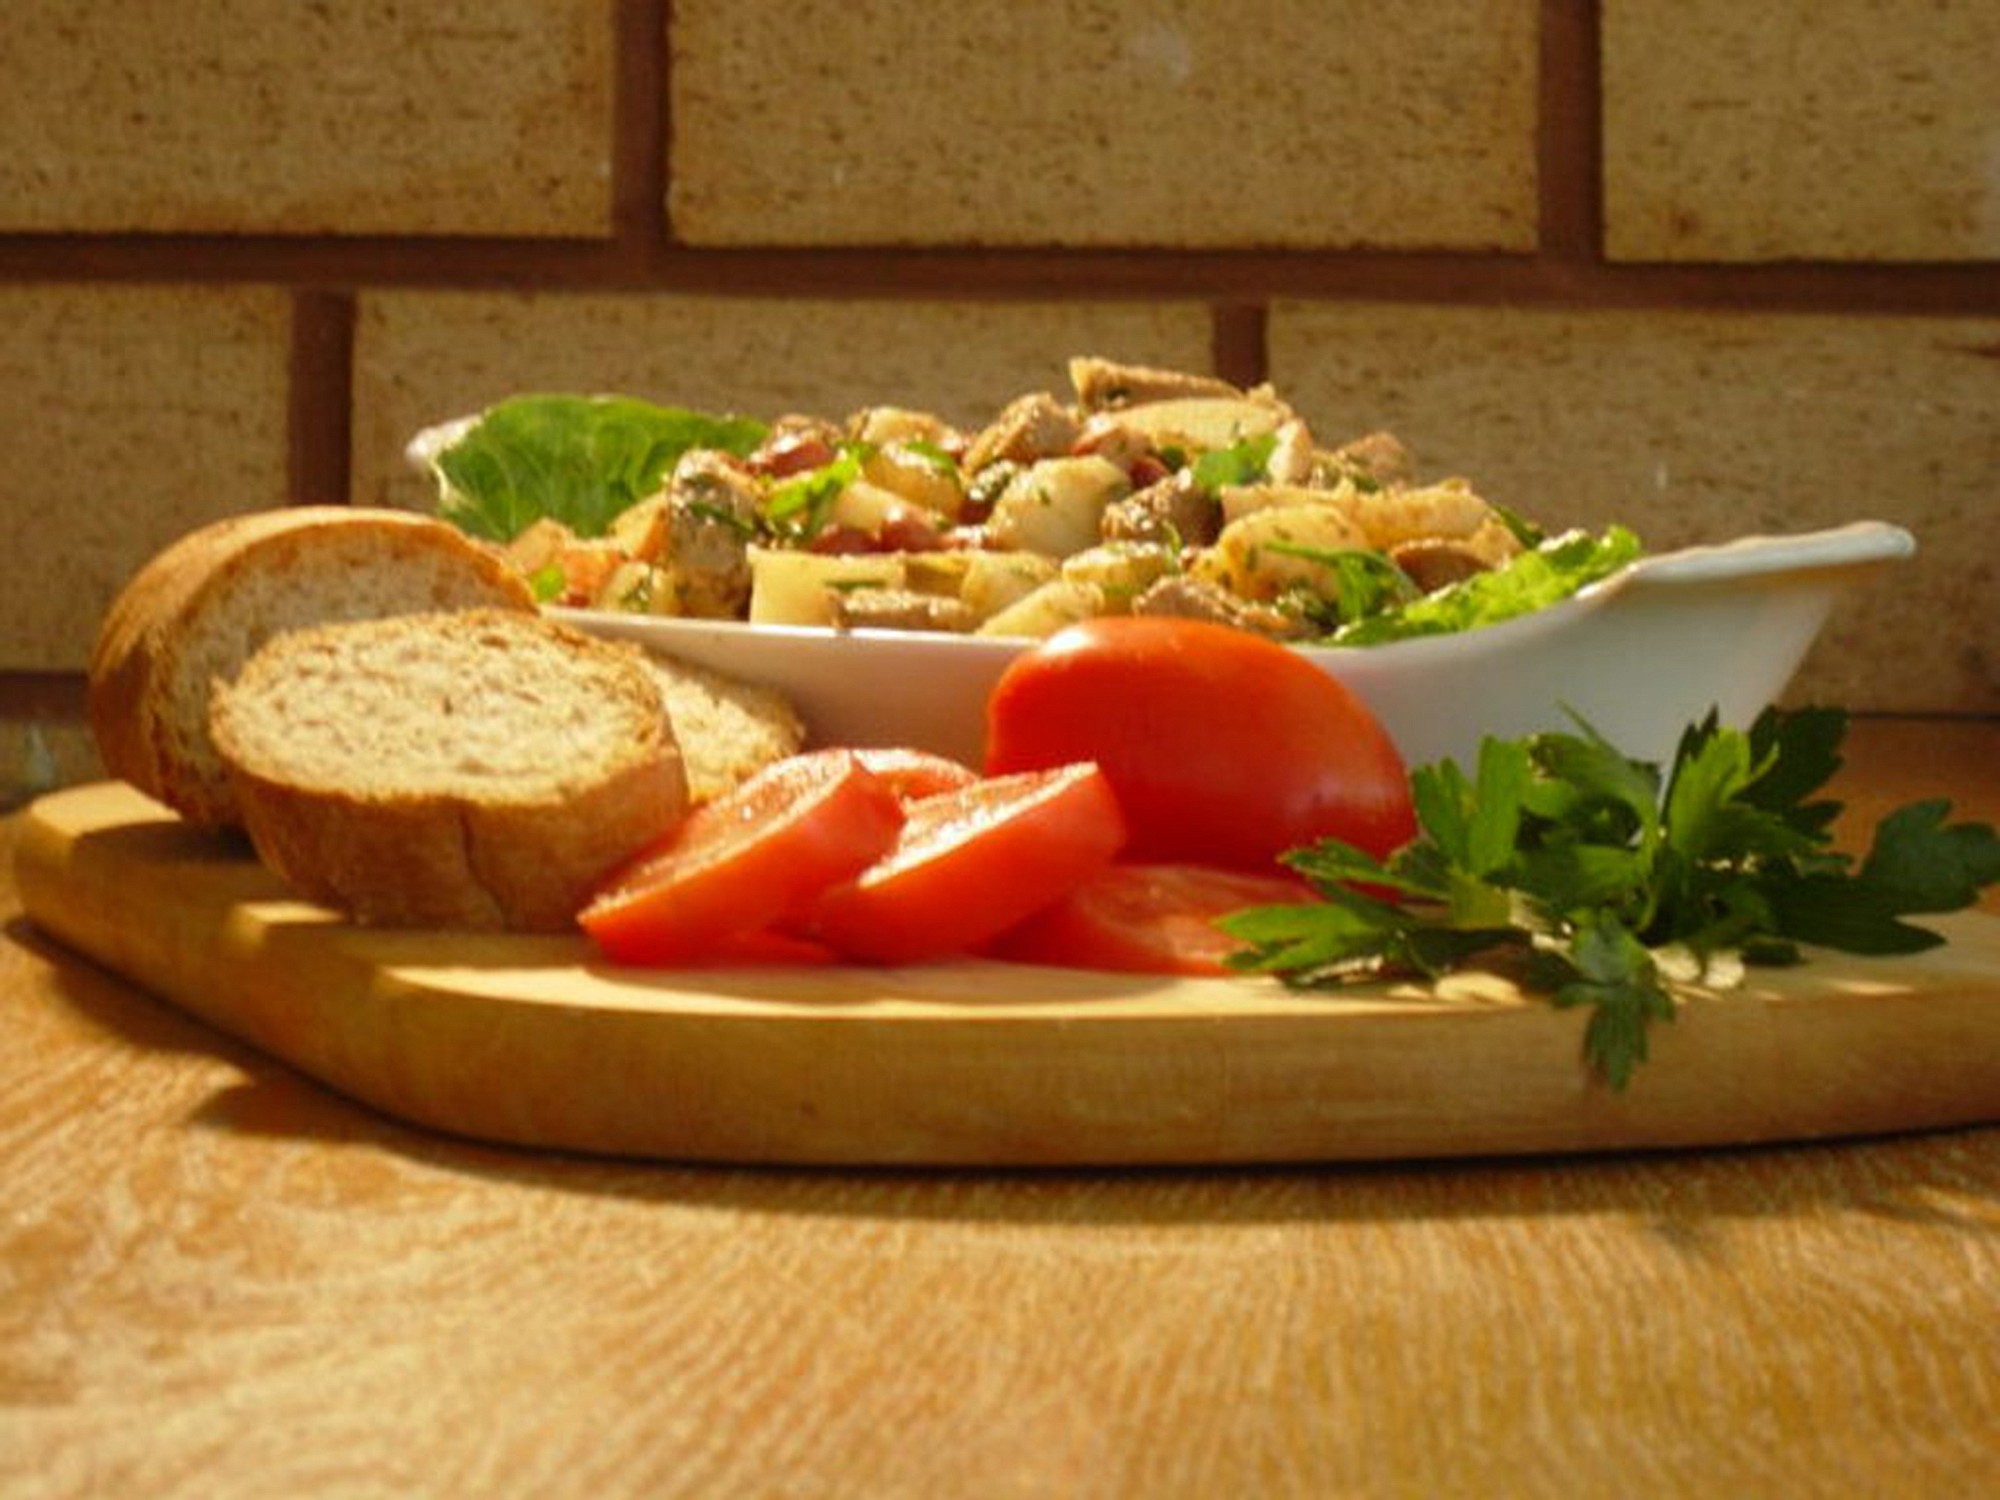 Potato and Sausage Salad is perfect for a summer evening.